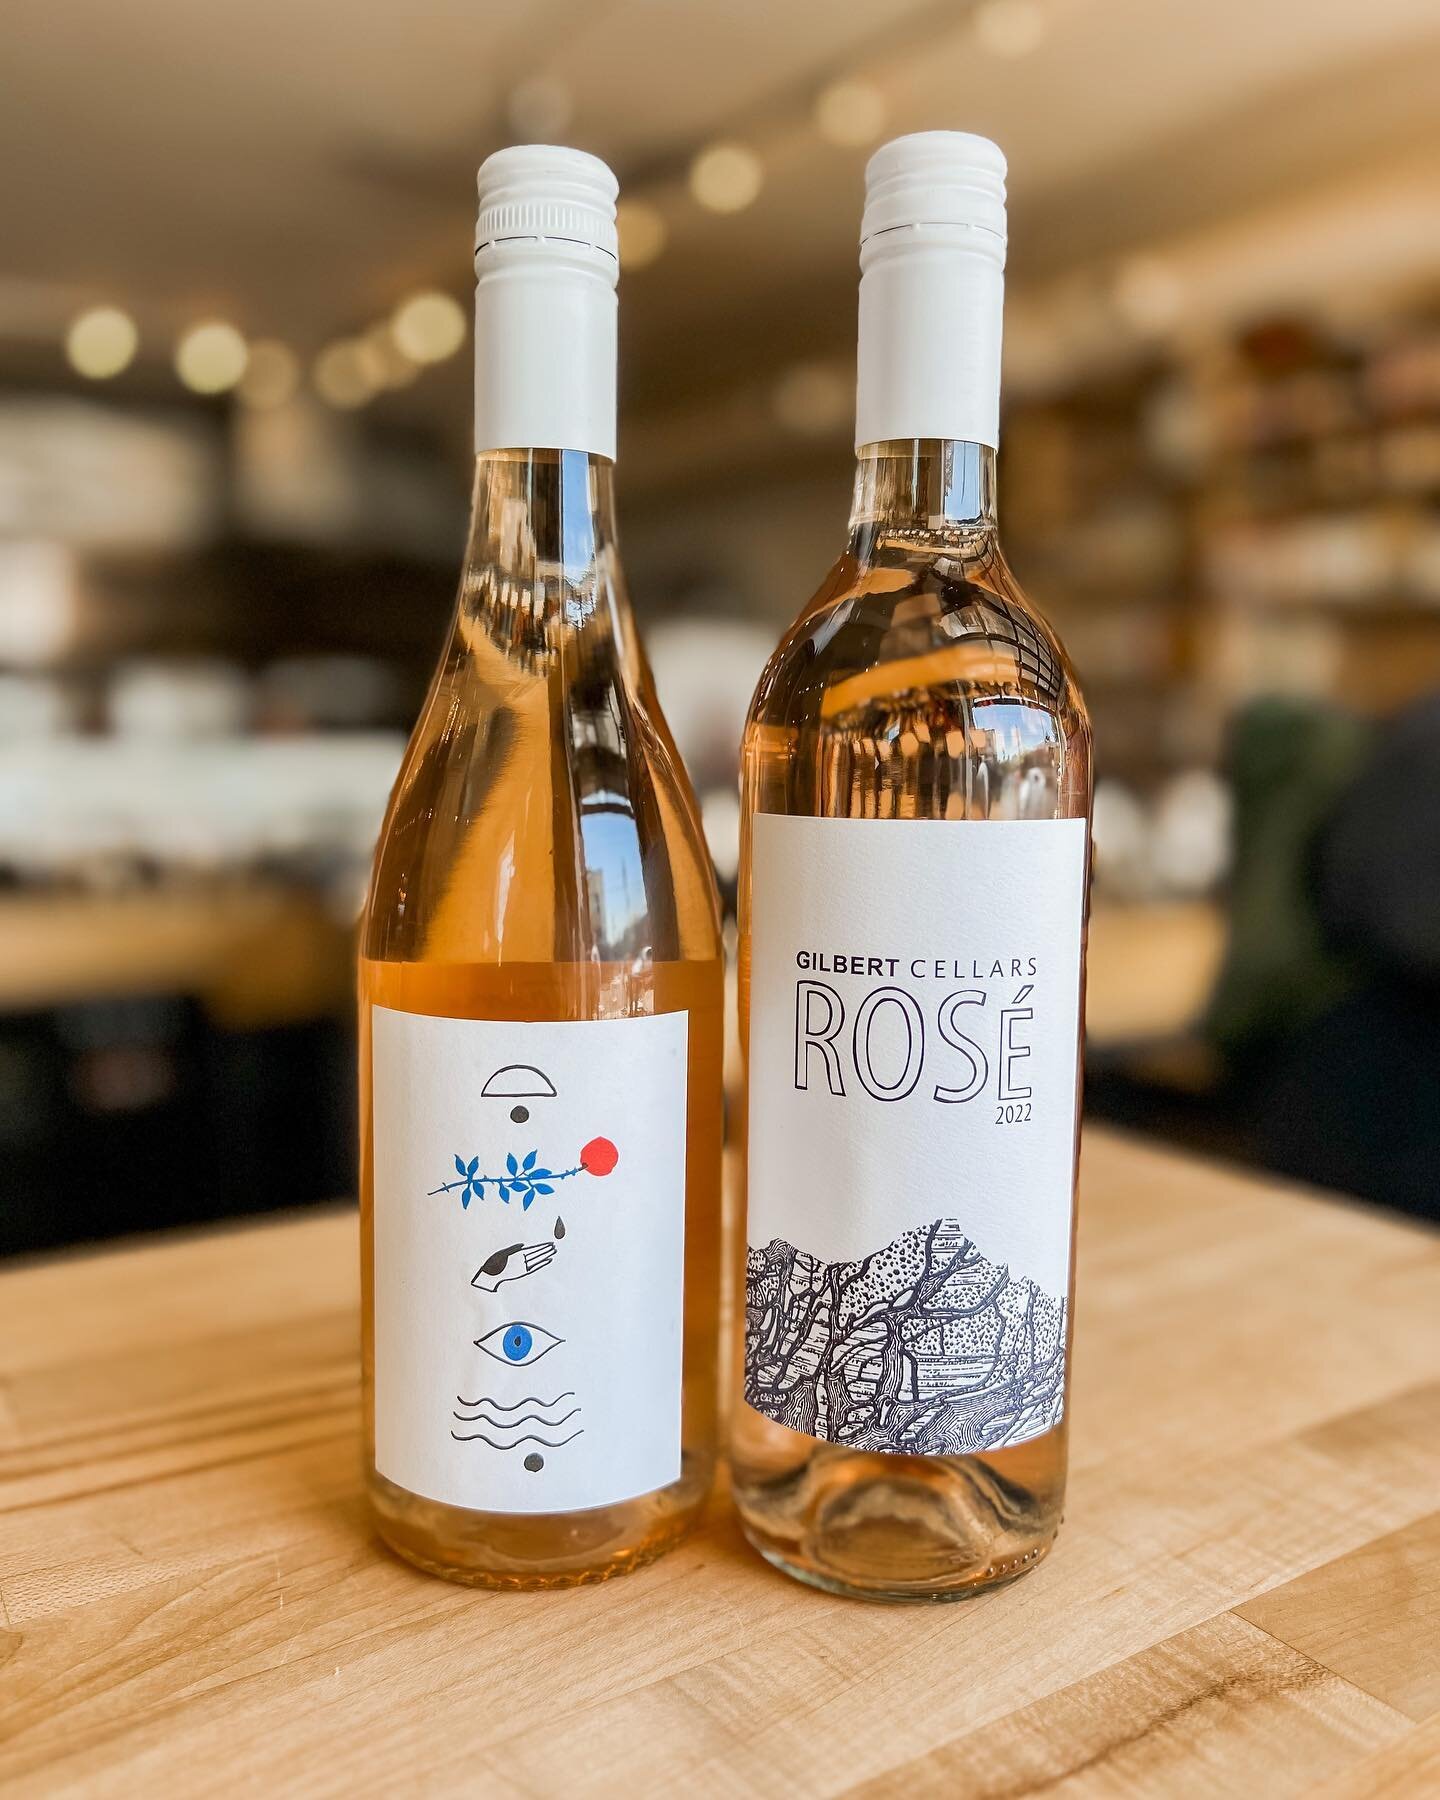 Ros&eacute; all week from our refreshing selection! 🌷

Featuring Kind Stranger &amp; Gilbert Cellars both locally made in Washington. 

Add a bottle to your Mother&rsquo;s Day order too!